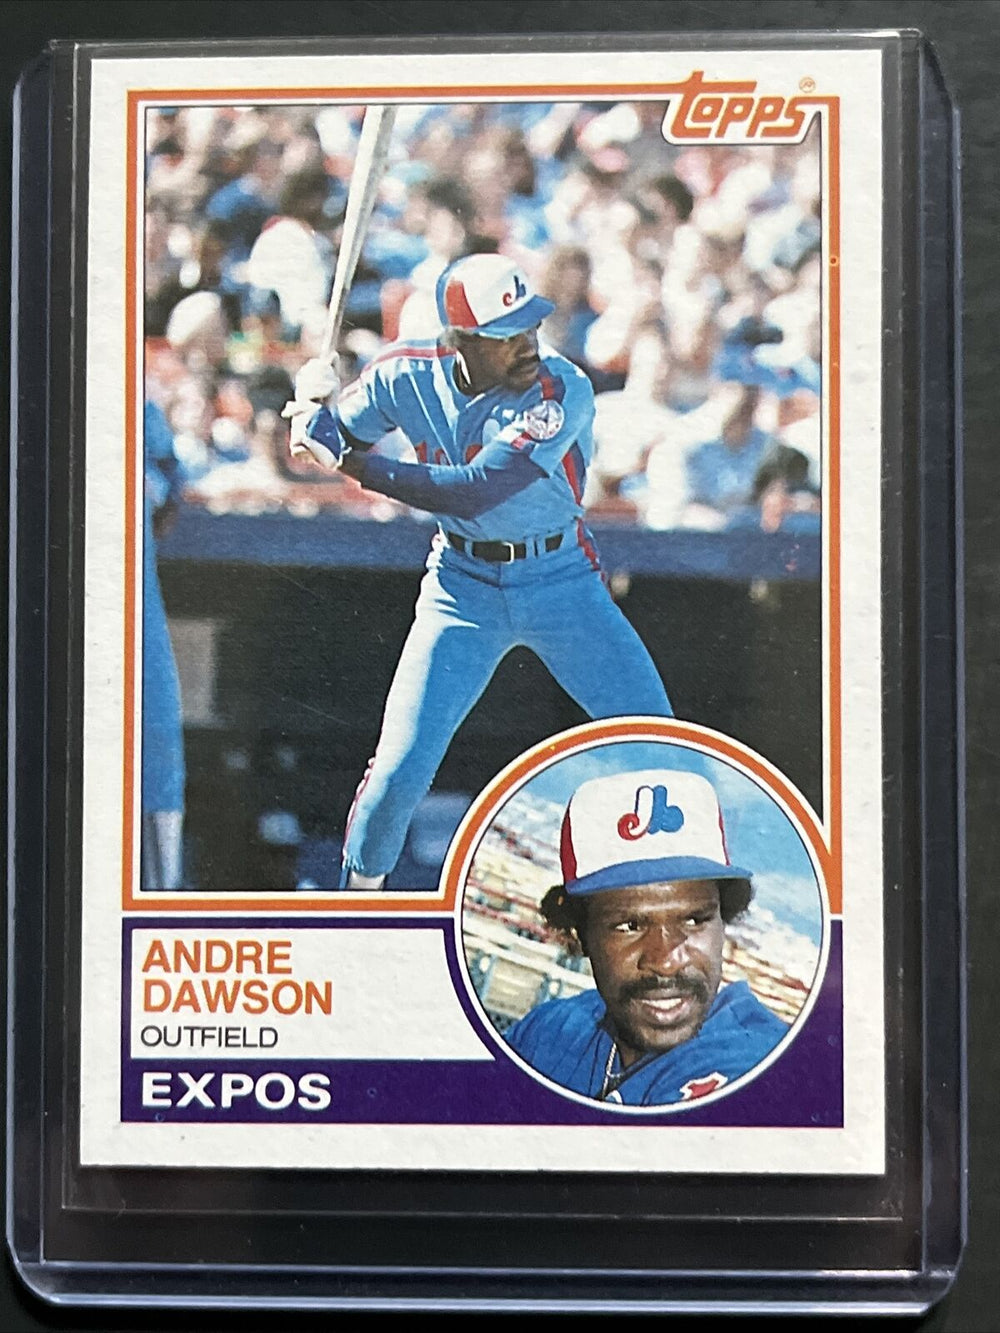 Andre Dawson 1983 Topps Series Mint Card #680